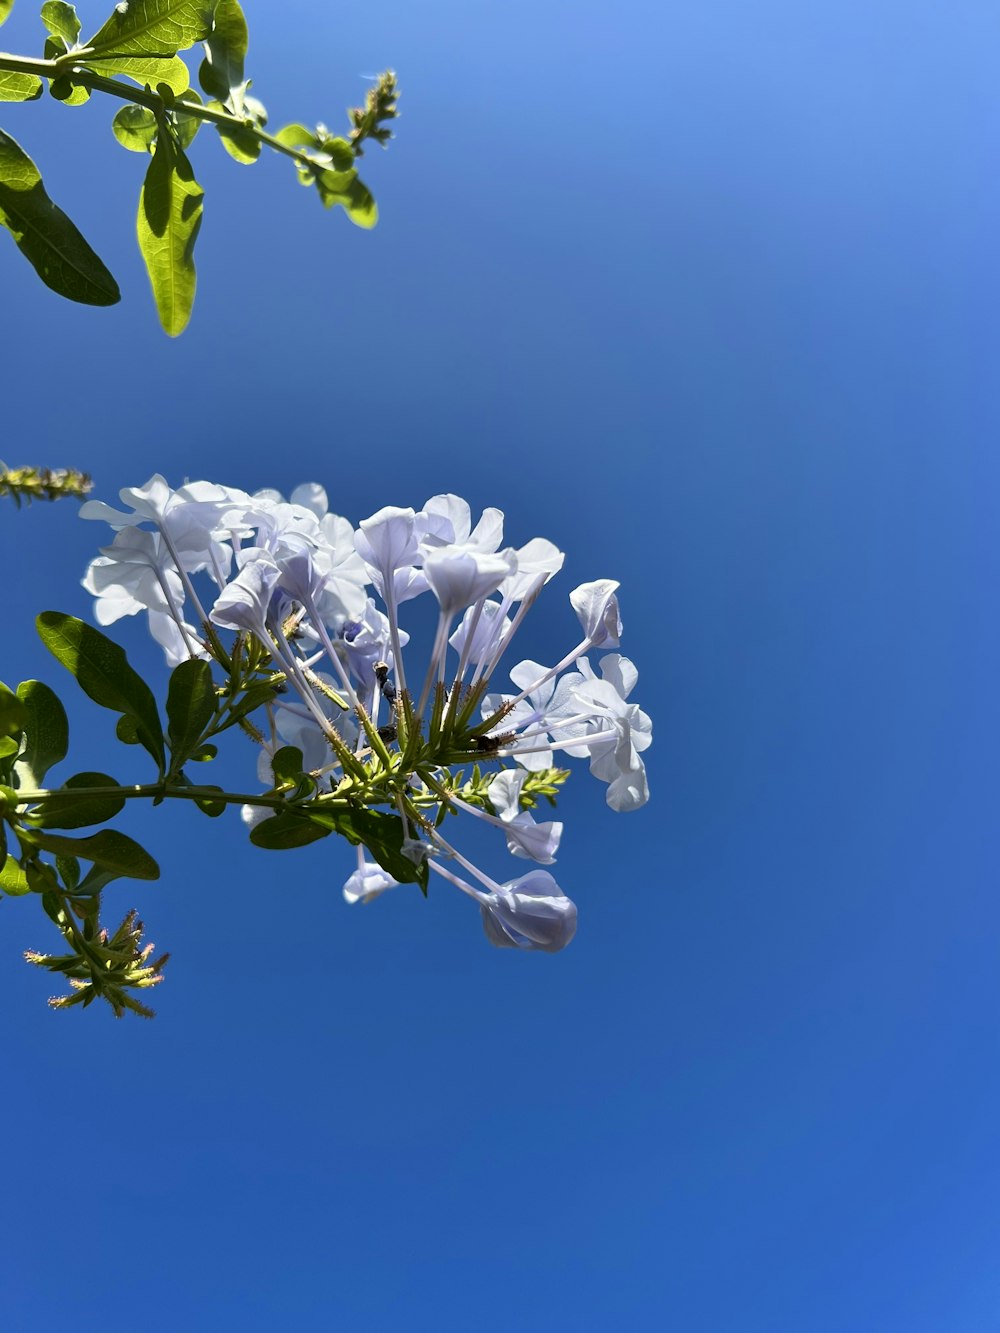 white flowers against a blue sky with green leaves